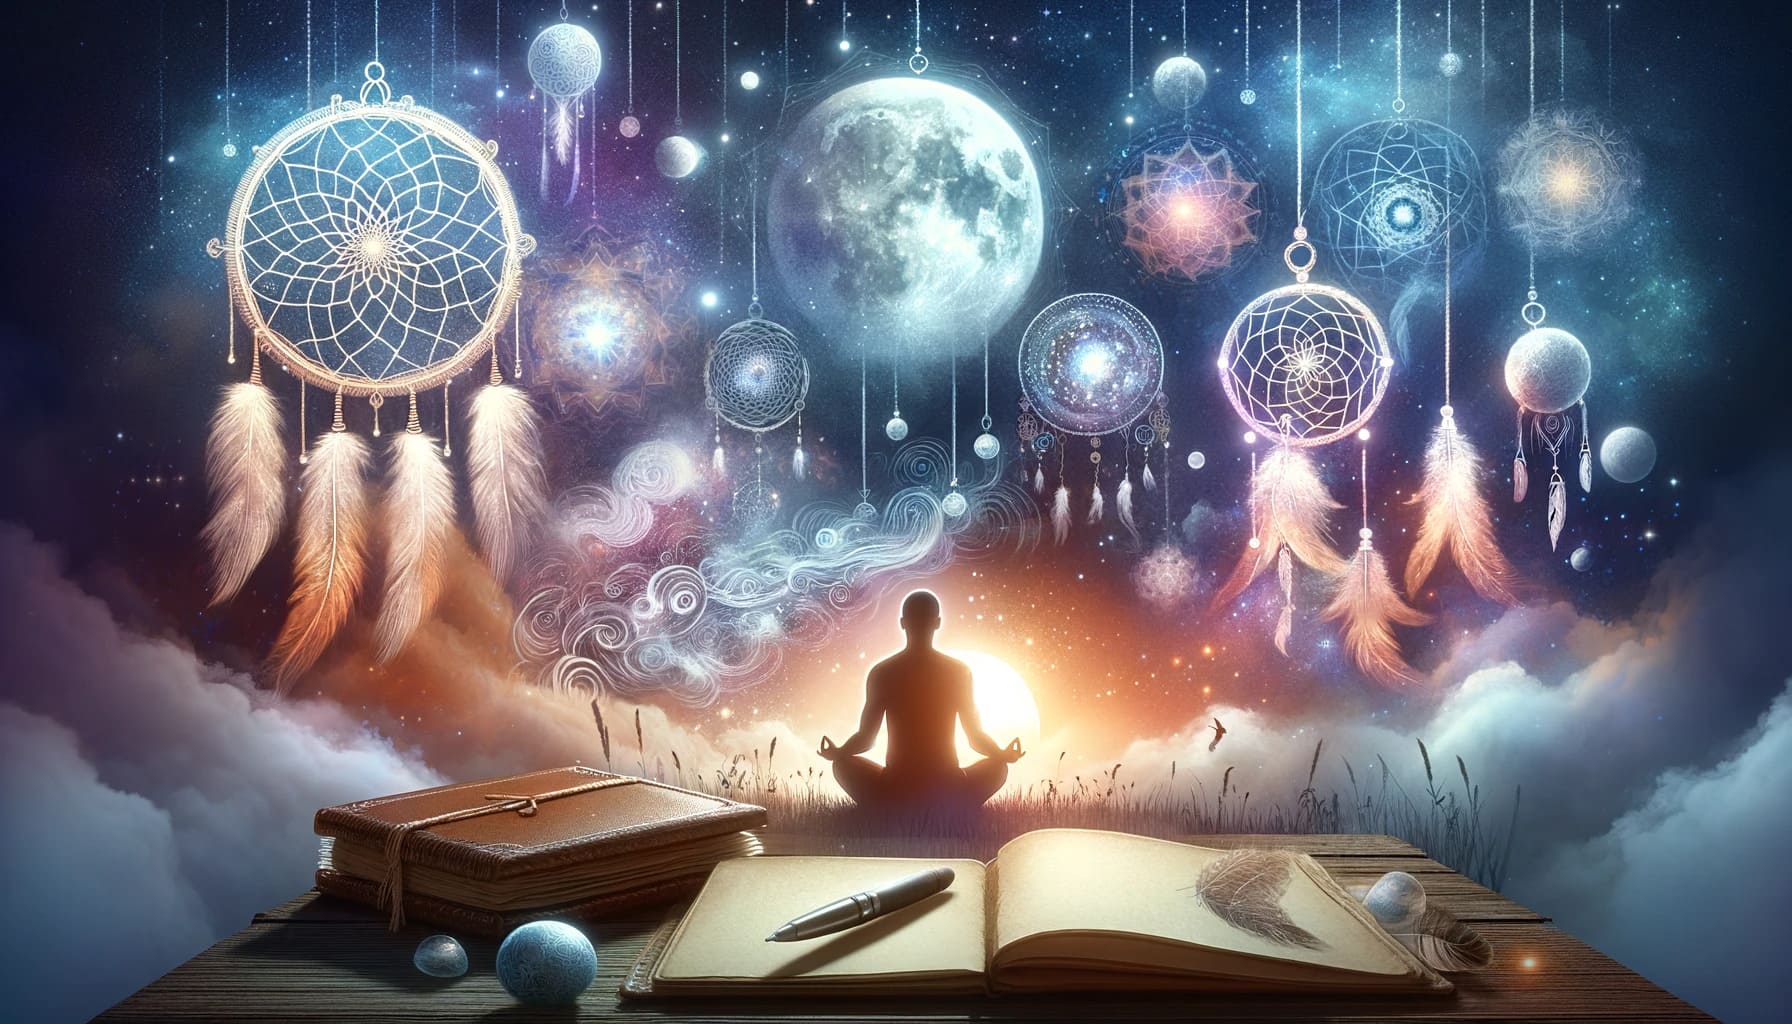 spiritual dream exploration techniques like a person meditating under a starry sky dream journals with ethereal w